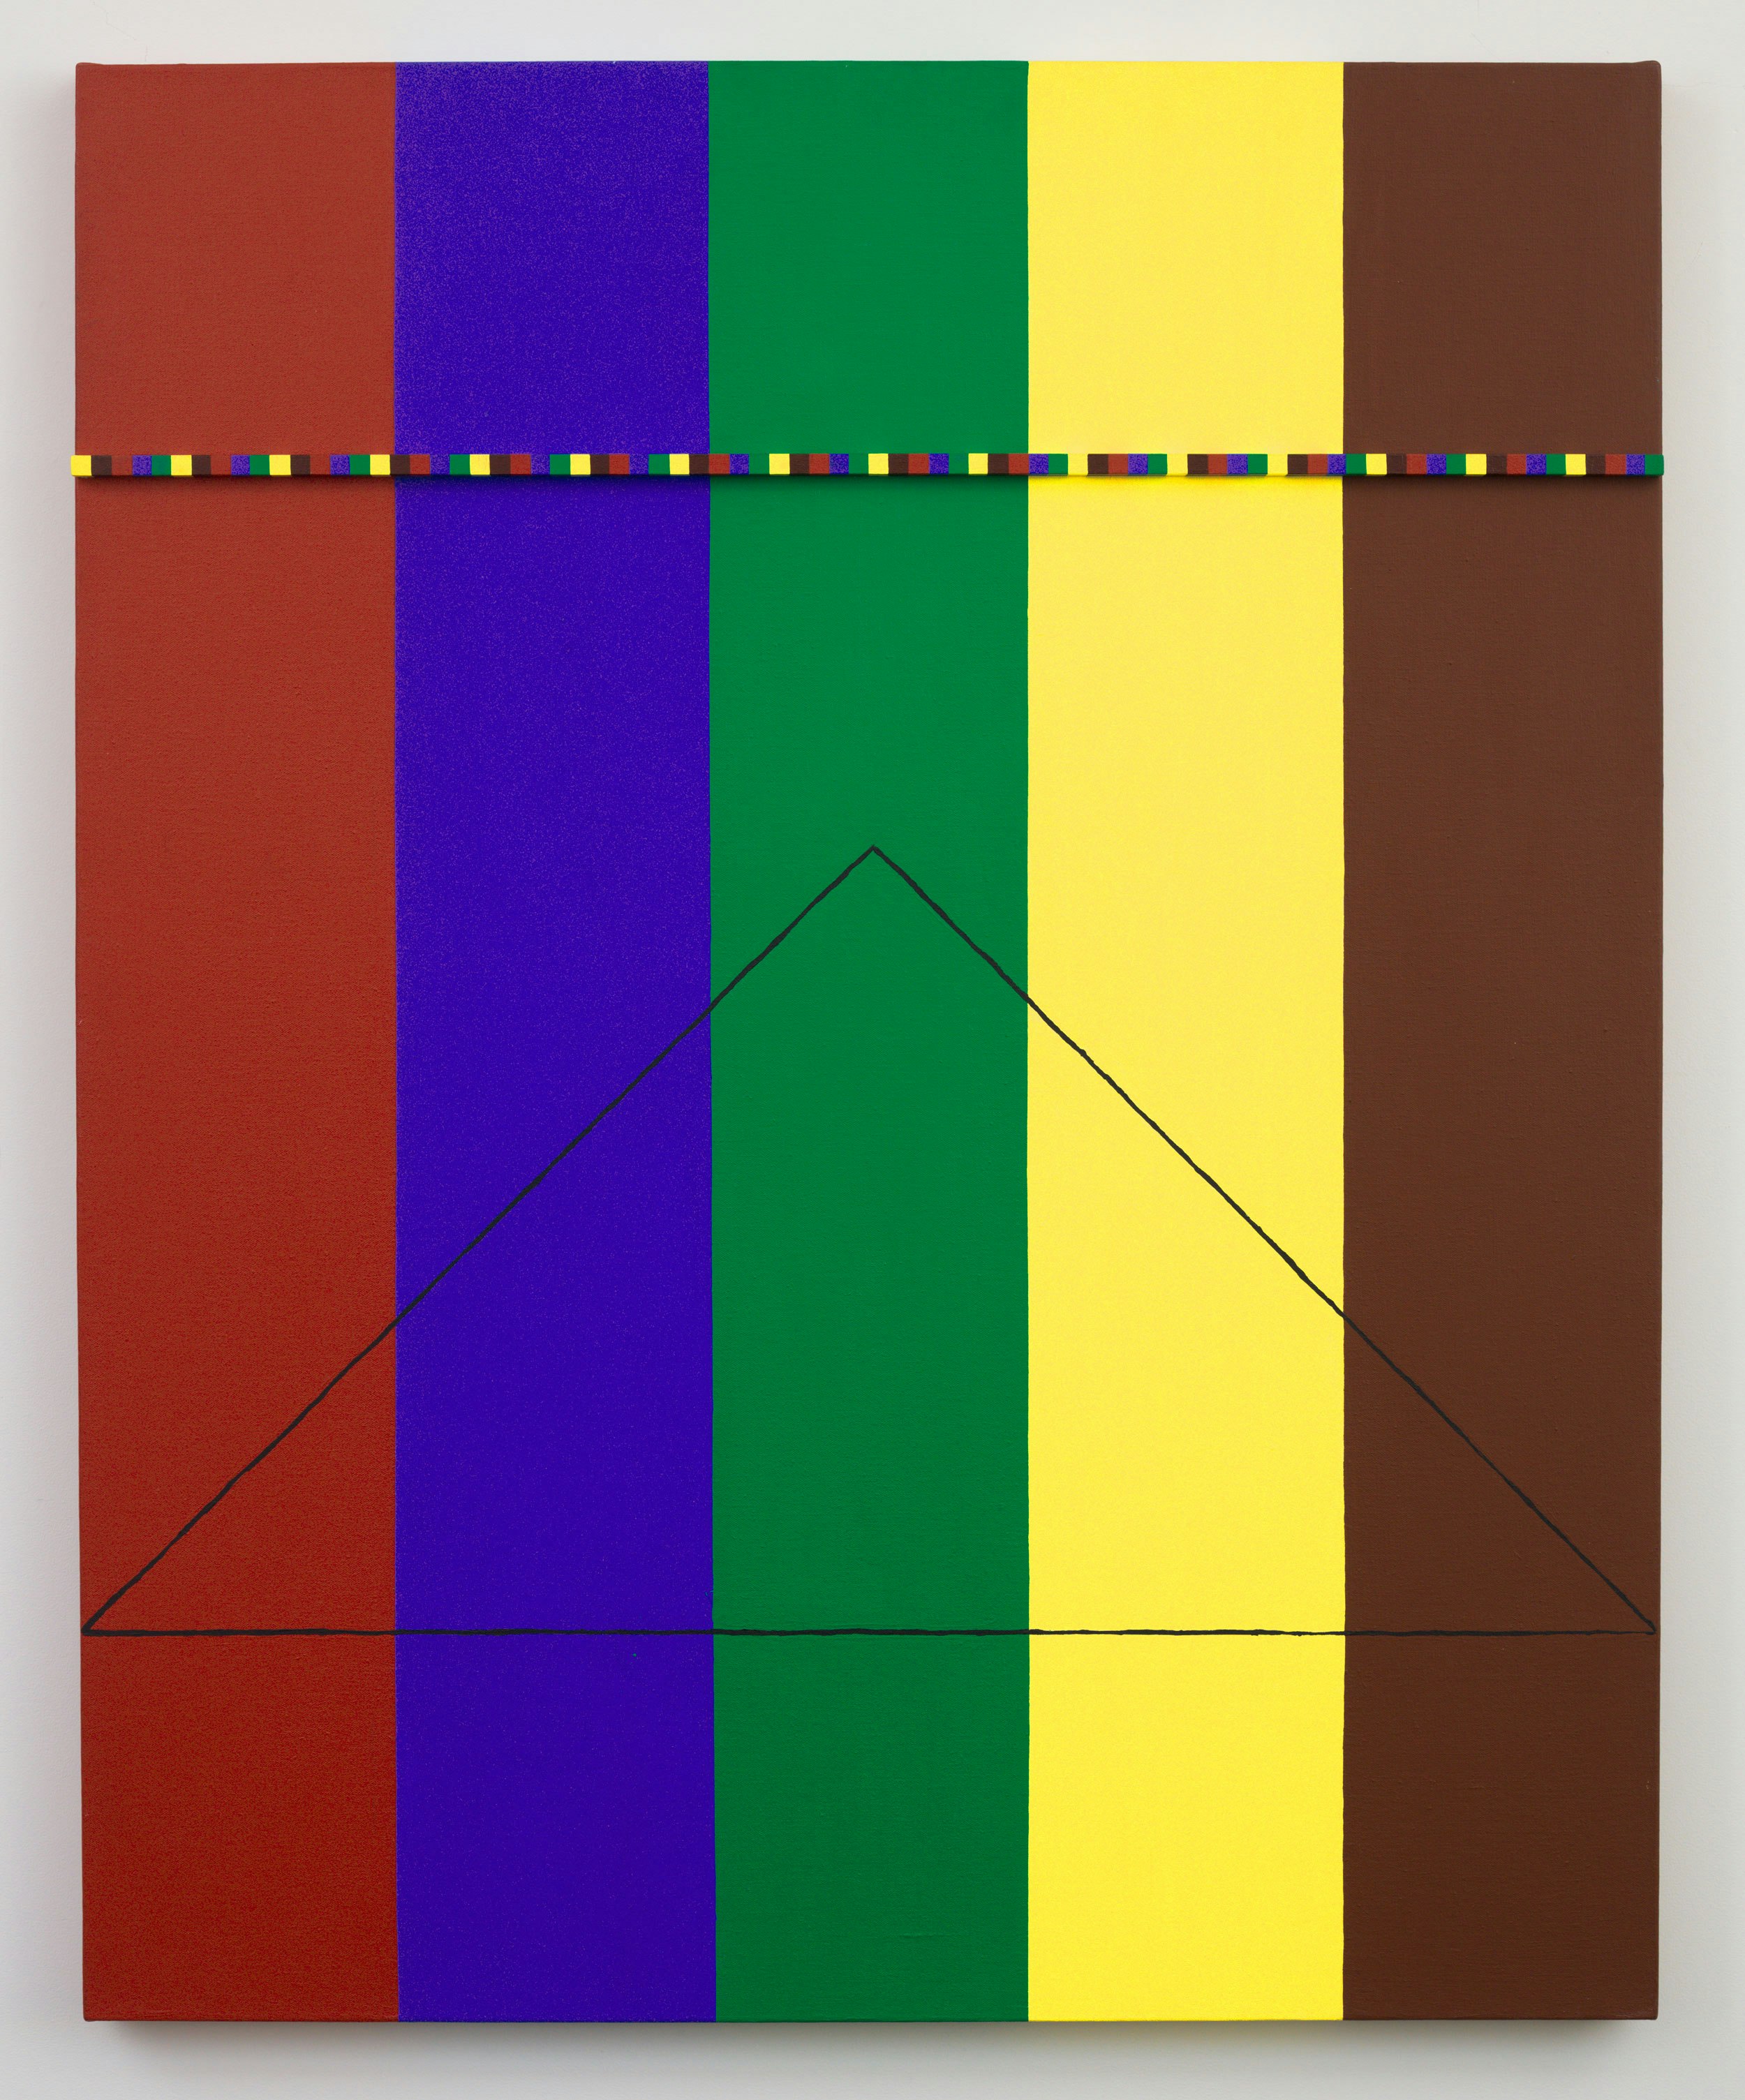 Regina Bogat, <em>The Phoenix and the Mountain #9</em>, 1980. Acrylic, wood, rope on canvas, 50 x 40 inches. Courtesy of Zürcher Gallery, NY / Paris.